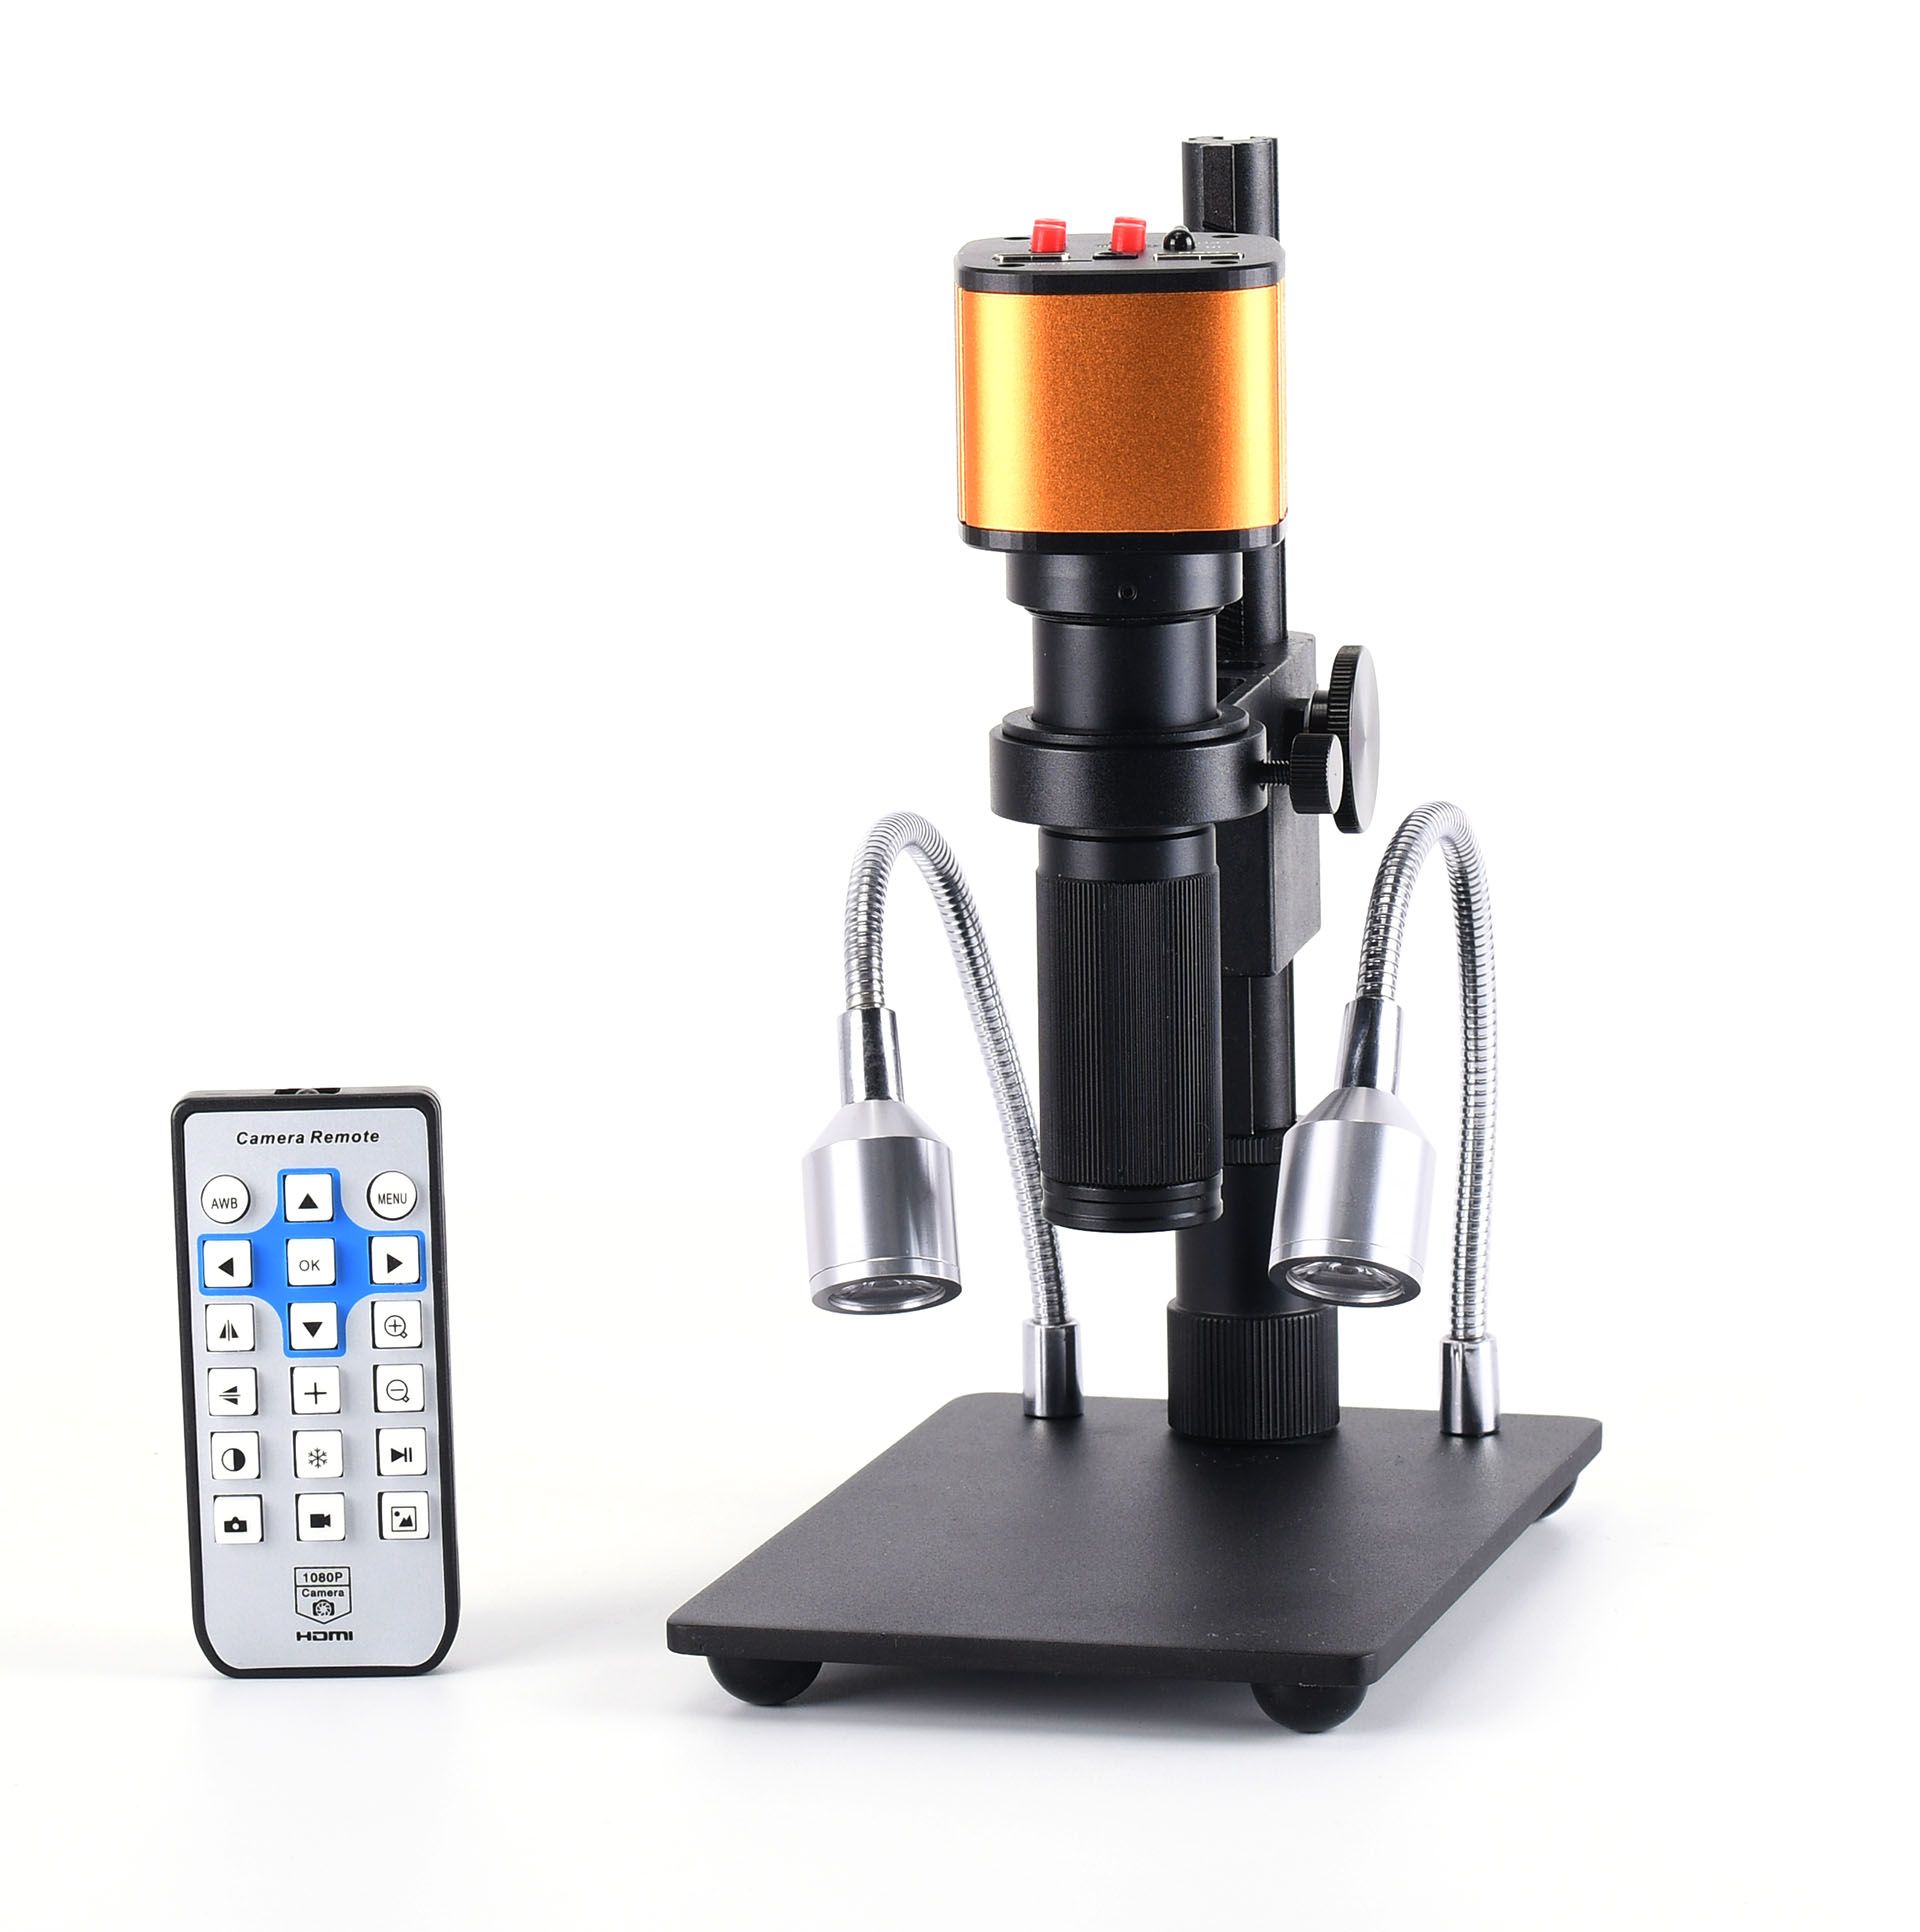 HD-16MP-USB-Digital-Electronic-Video-Microscope-Camera-100X-C--lens--LED--Light--Stand-Holder-For-PC-1586180